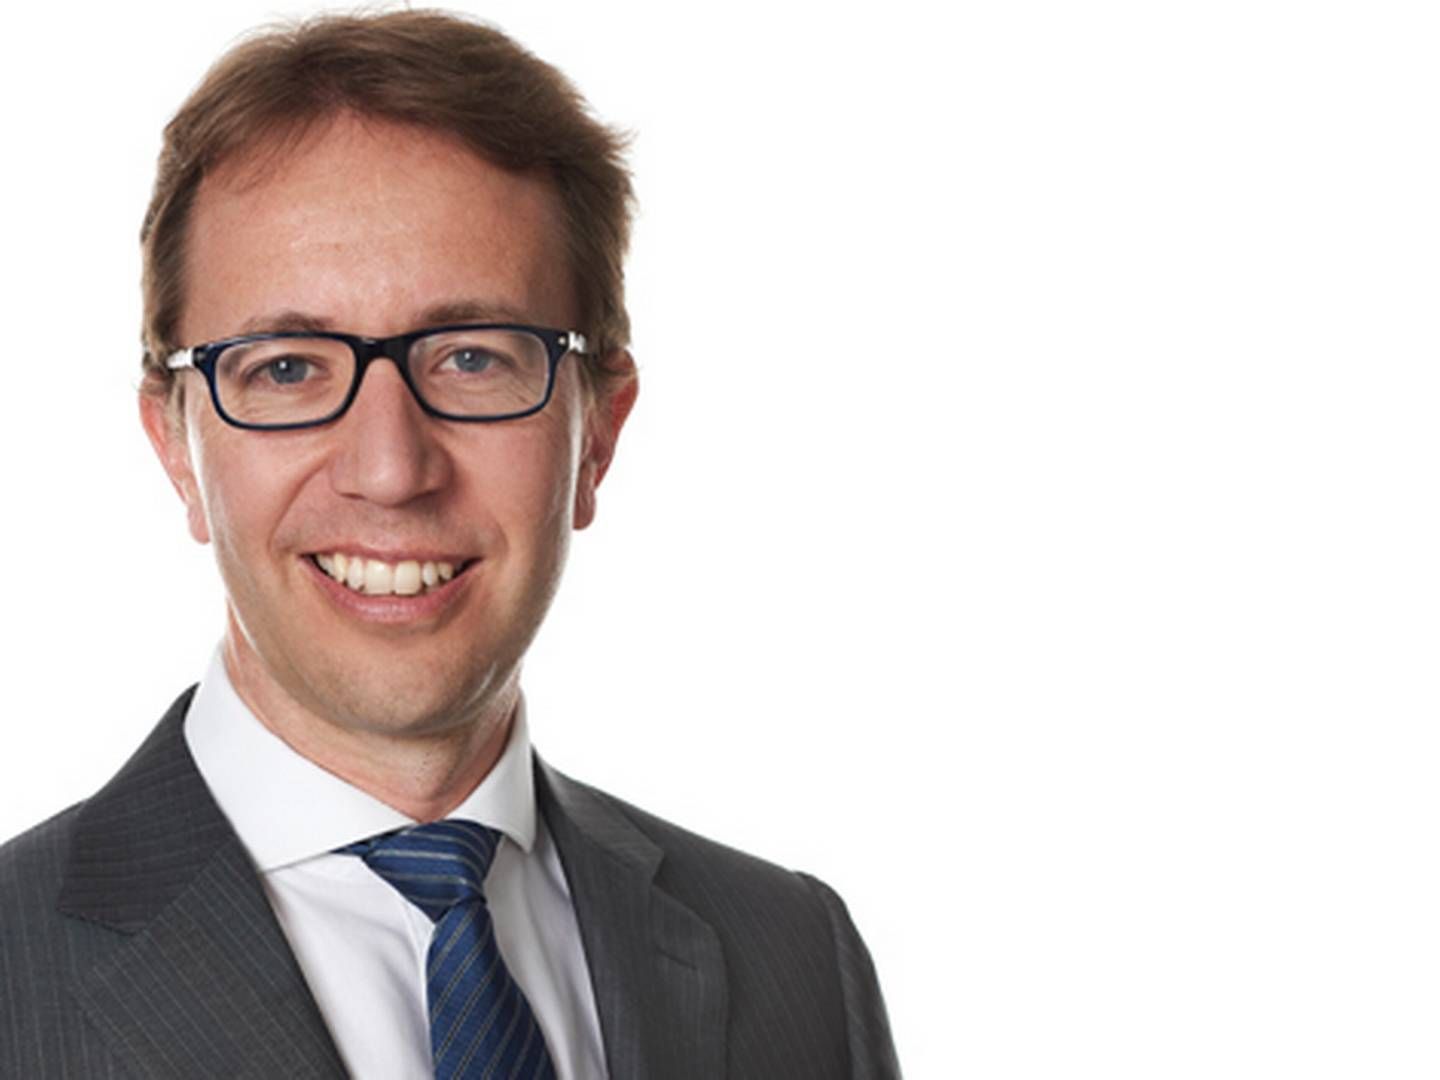 Christian Kvorning is Senior Partner at Danske Private Equity Partners and comes from a job with PKA-AIP. | Photo: Danske Private Equity Partners